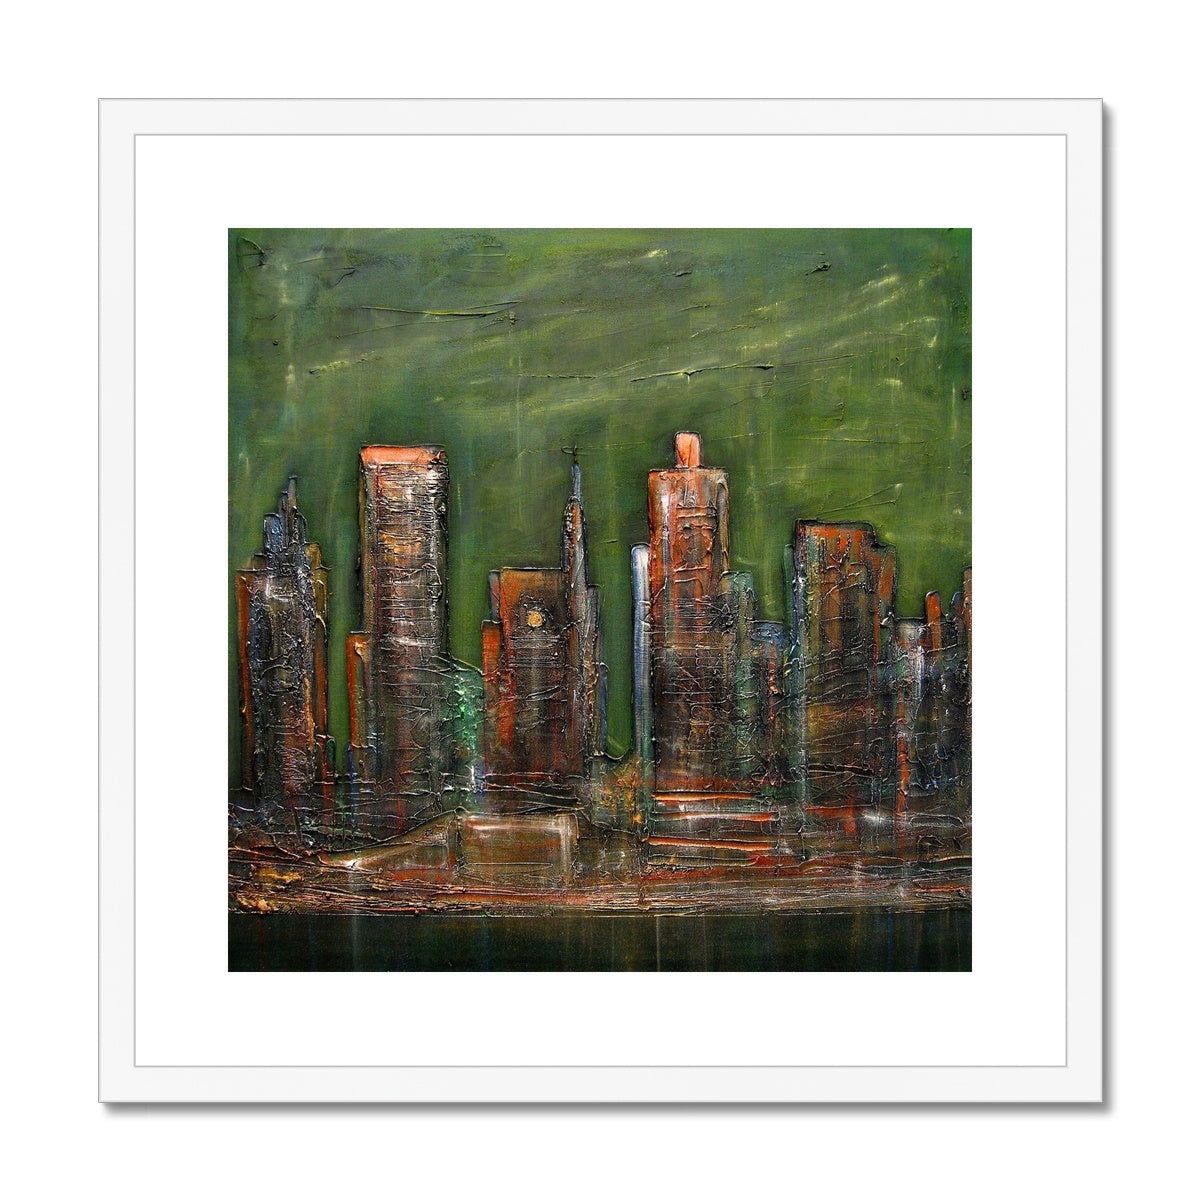 A Neon New York Painting | Framed & Mounted Prints From Scotland-Framed & Mounted Prints-World Art Gallery-20"x20"-White Frame-Paintings, Prints, Homeware, Art Gifts From Scotland By Scottish Artist Kevin Hunter